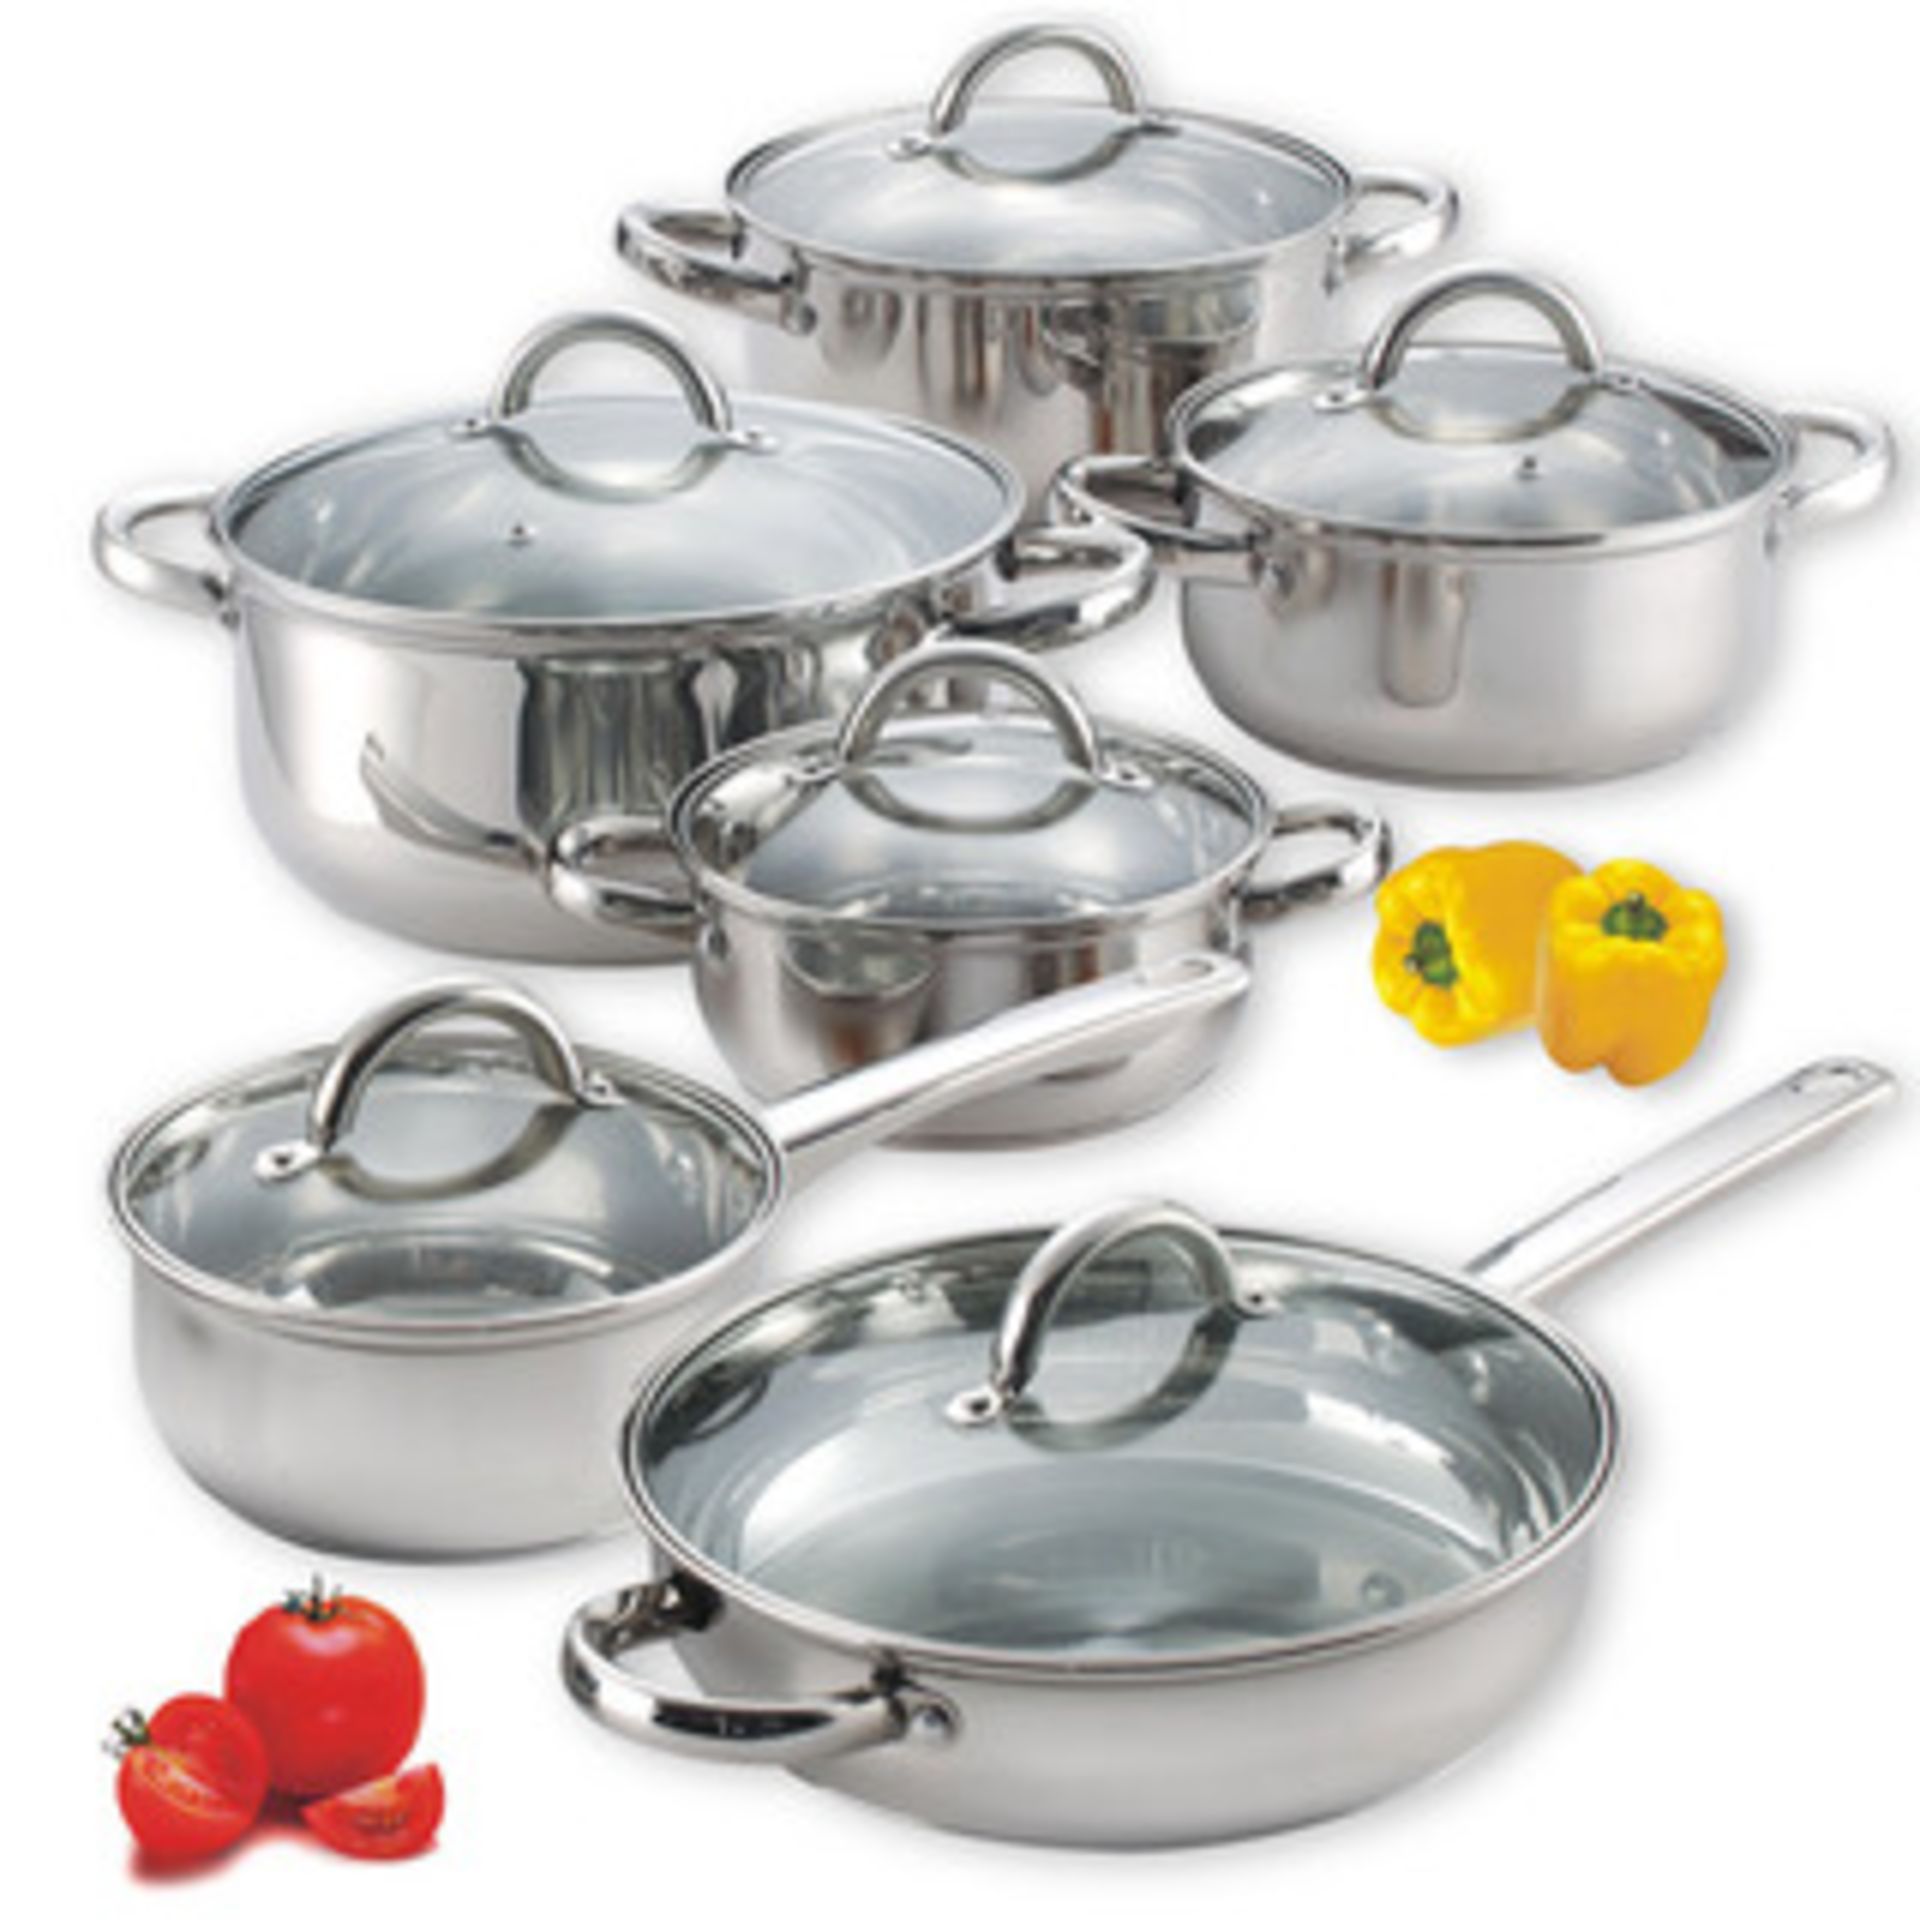 V Brand New 12 Piece Professional Stainless Steel Cookware Set With Stainless Steel Lids RRP£199.99